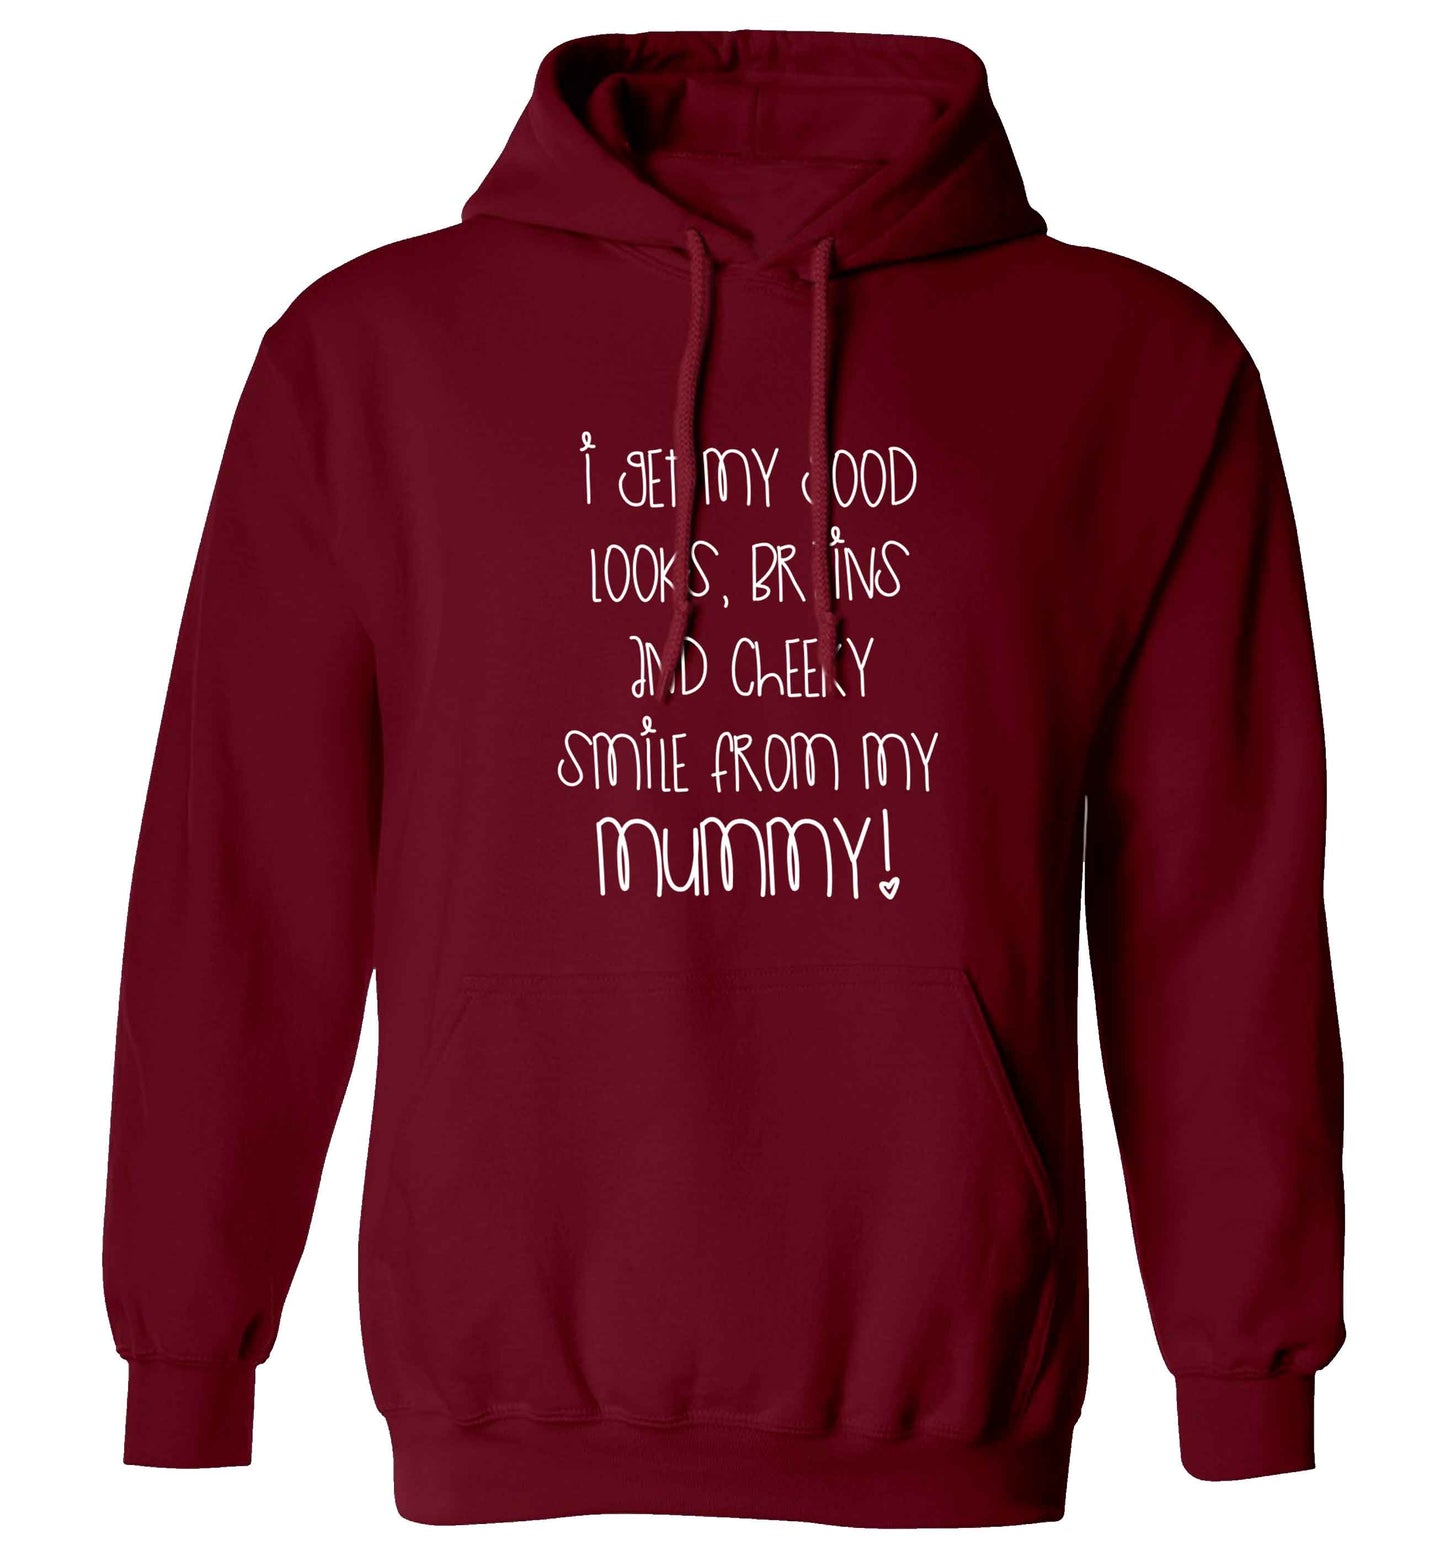 I get my good looks, brains and cheeky smile from my mummy adults unisex maroon hoodie 2XL